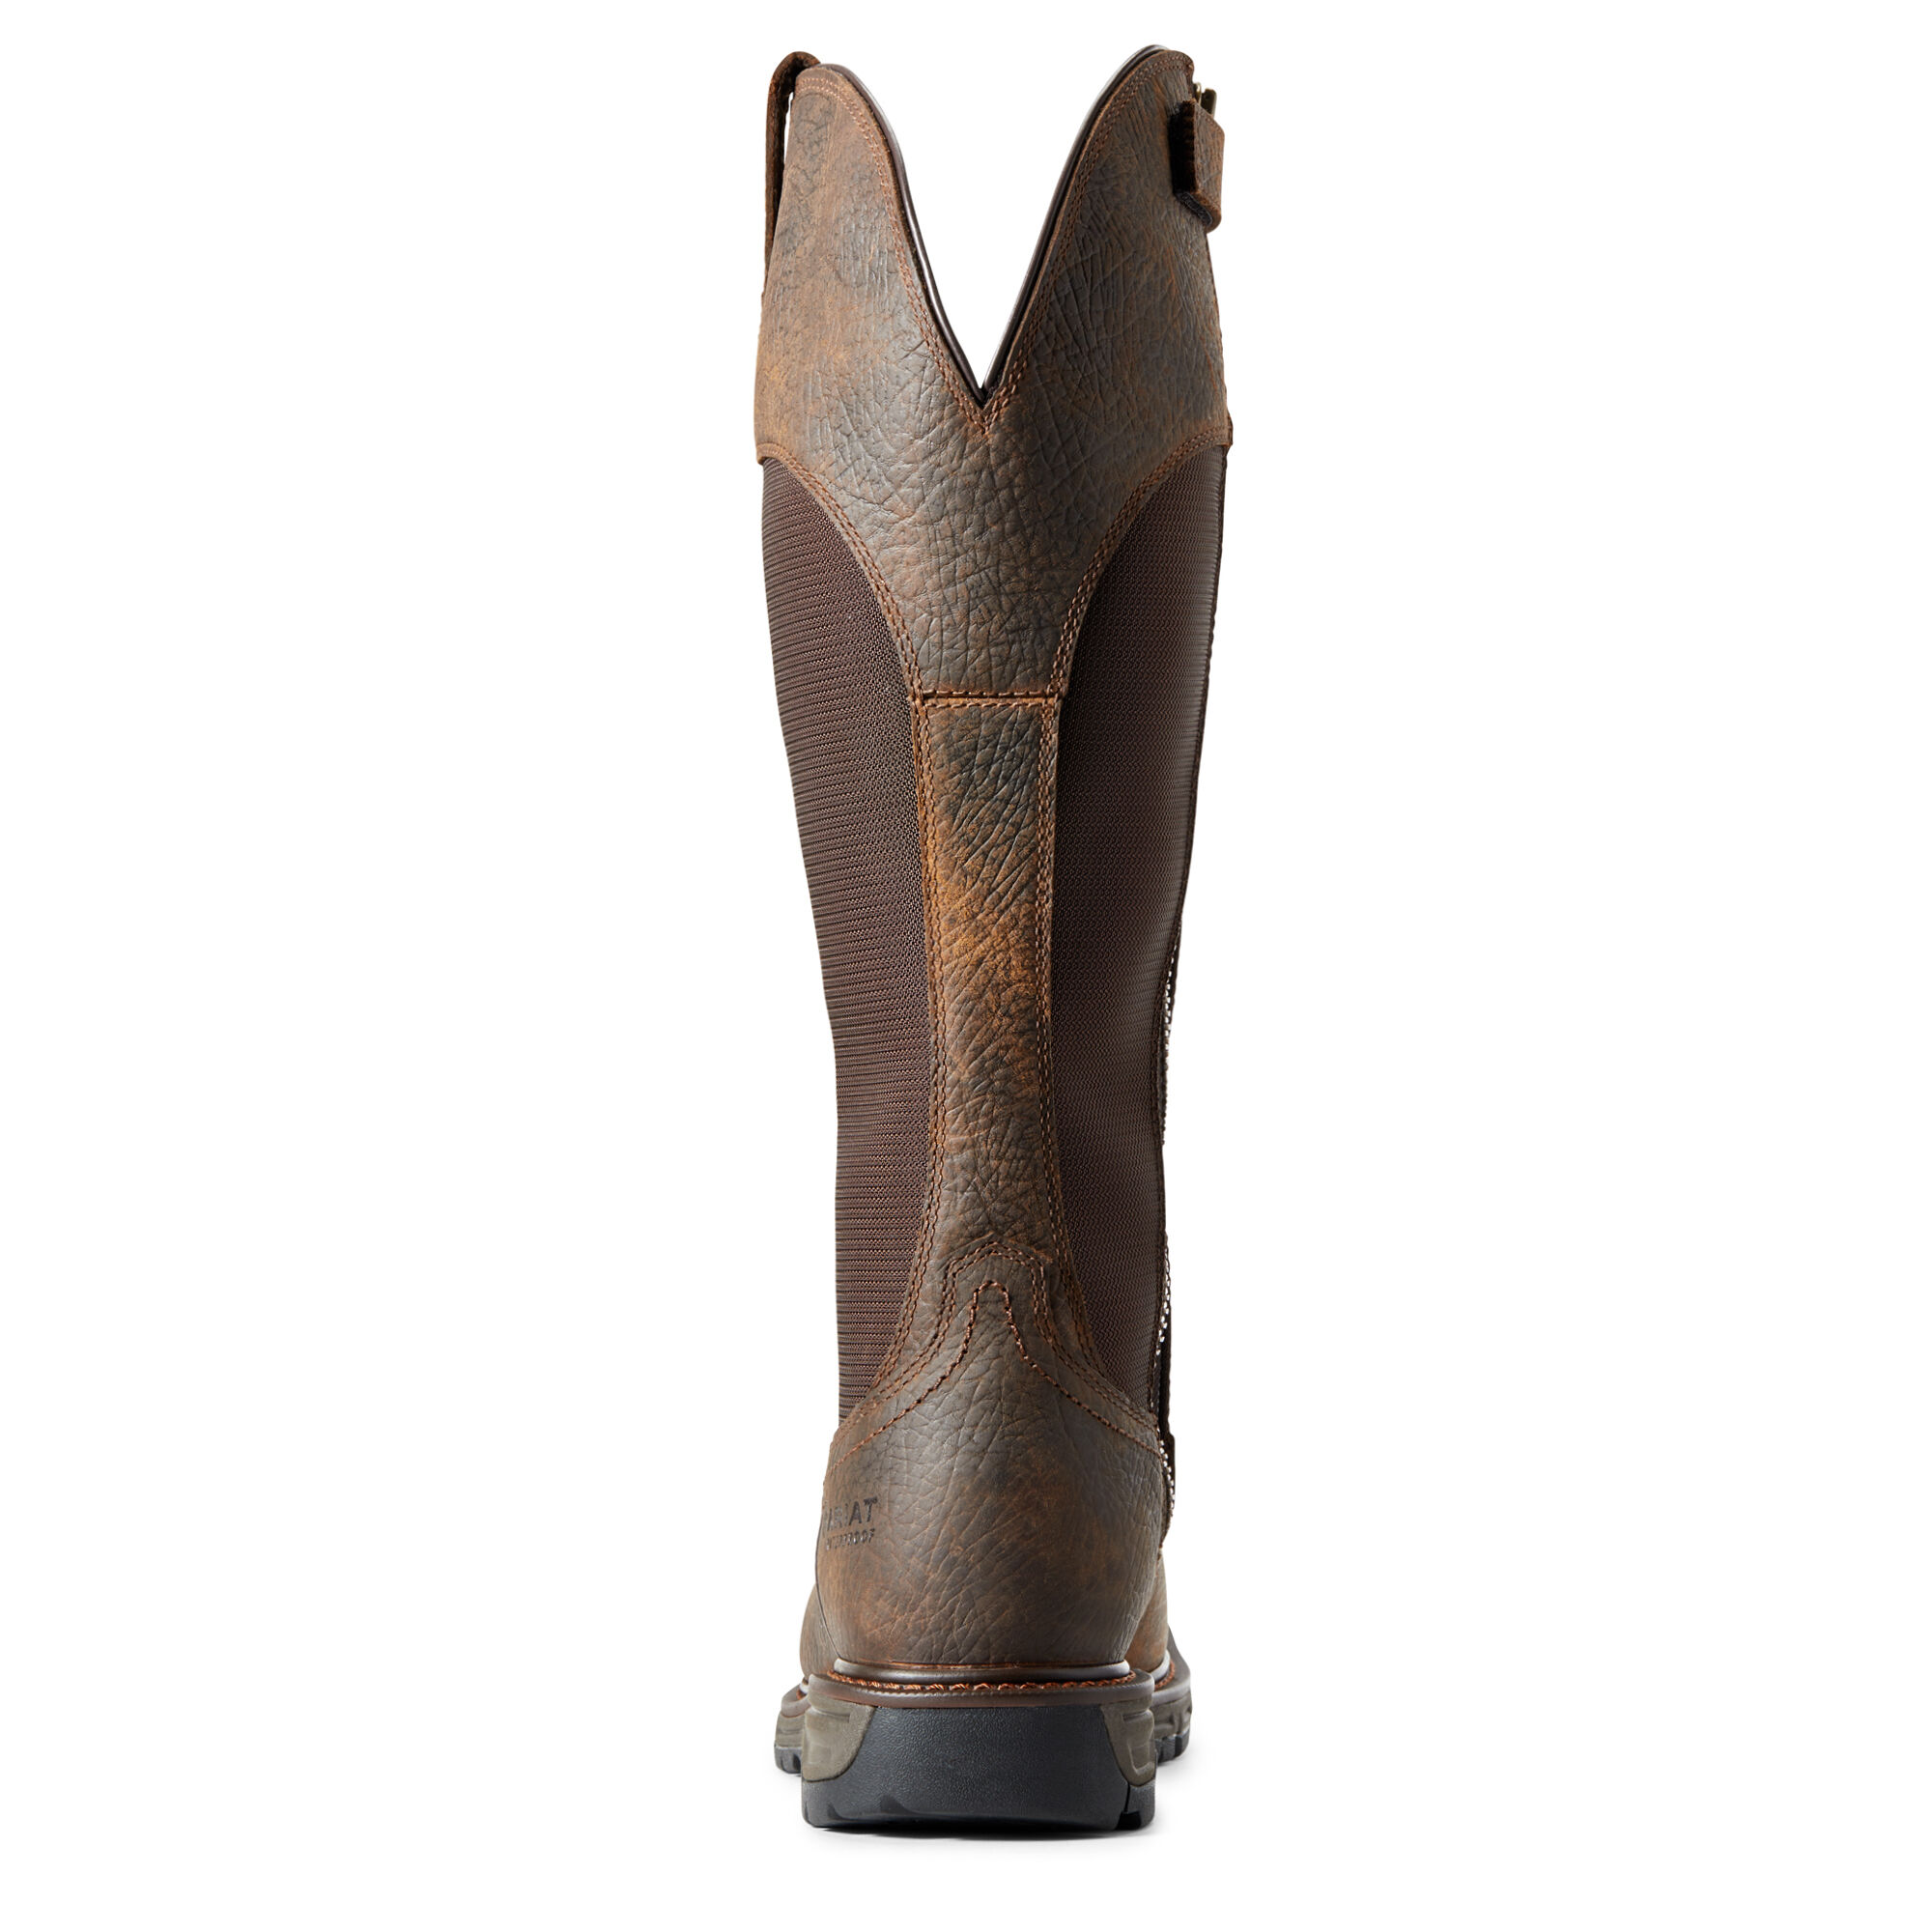 Conquest Snakeboot Waterproof Hunting 